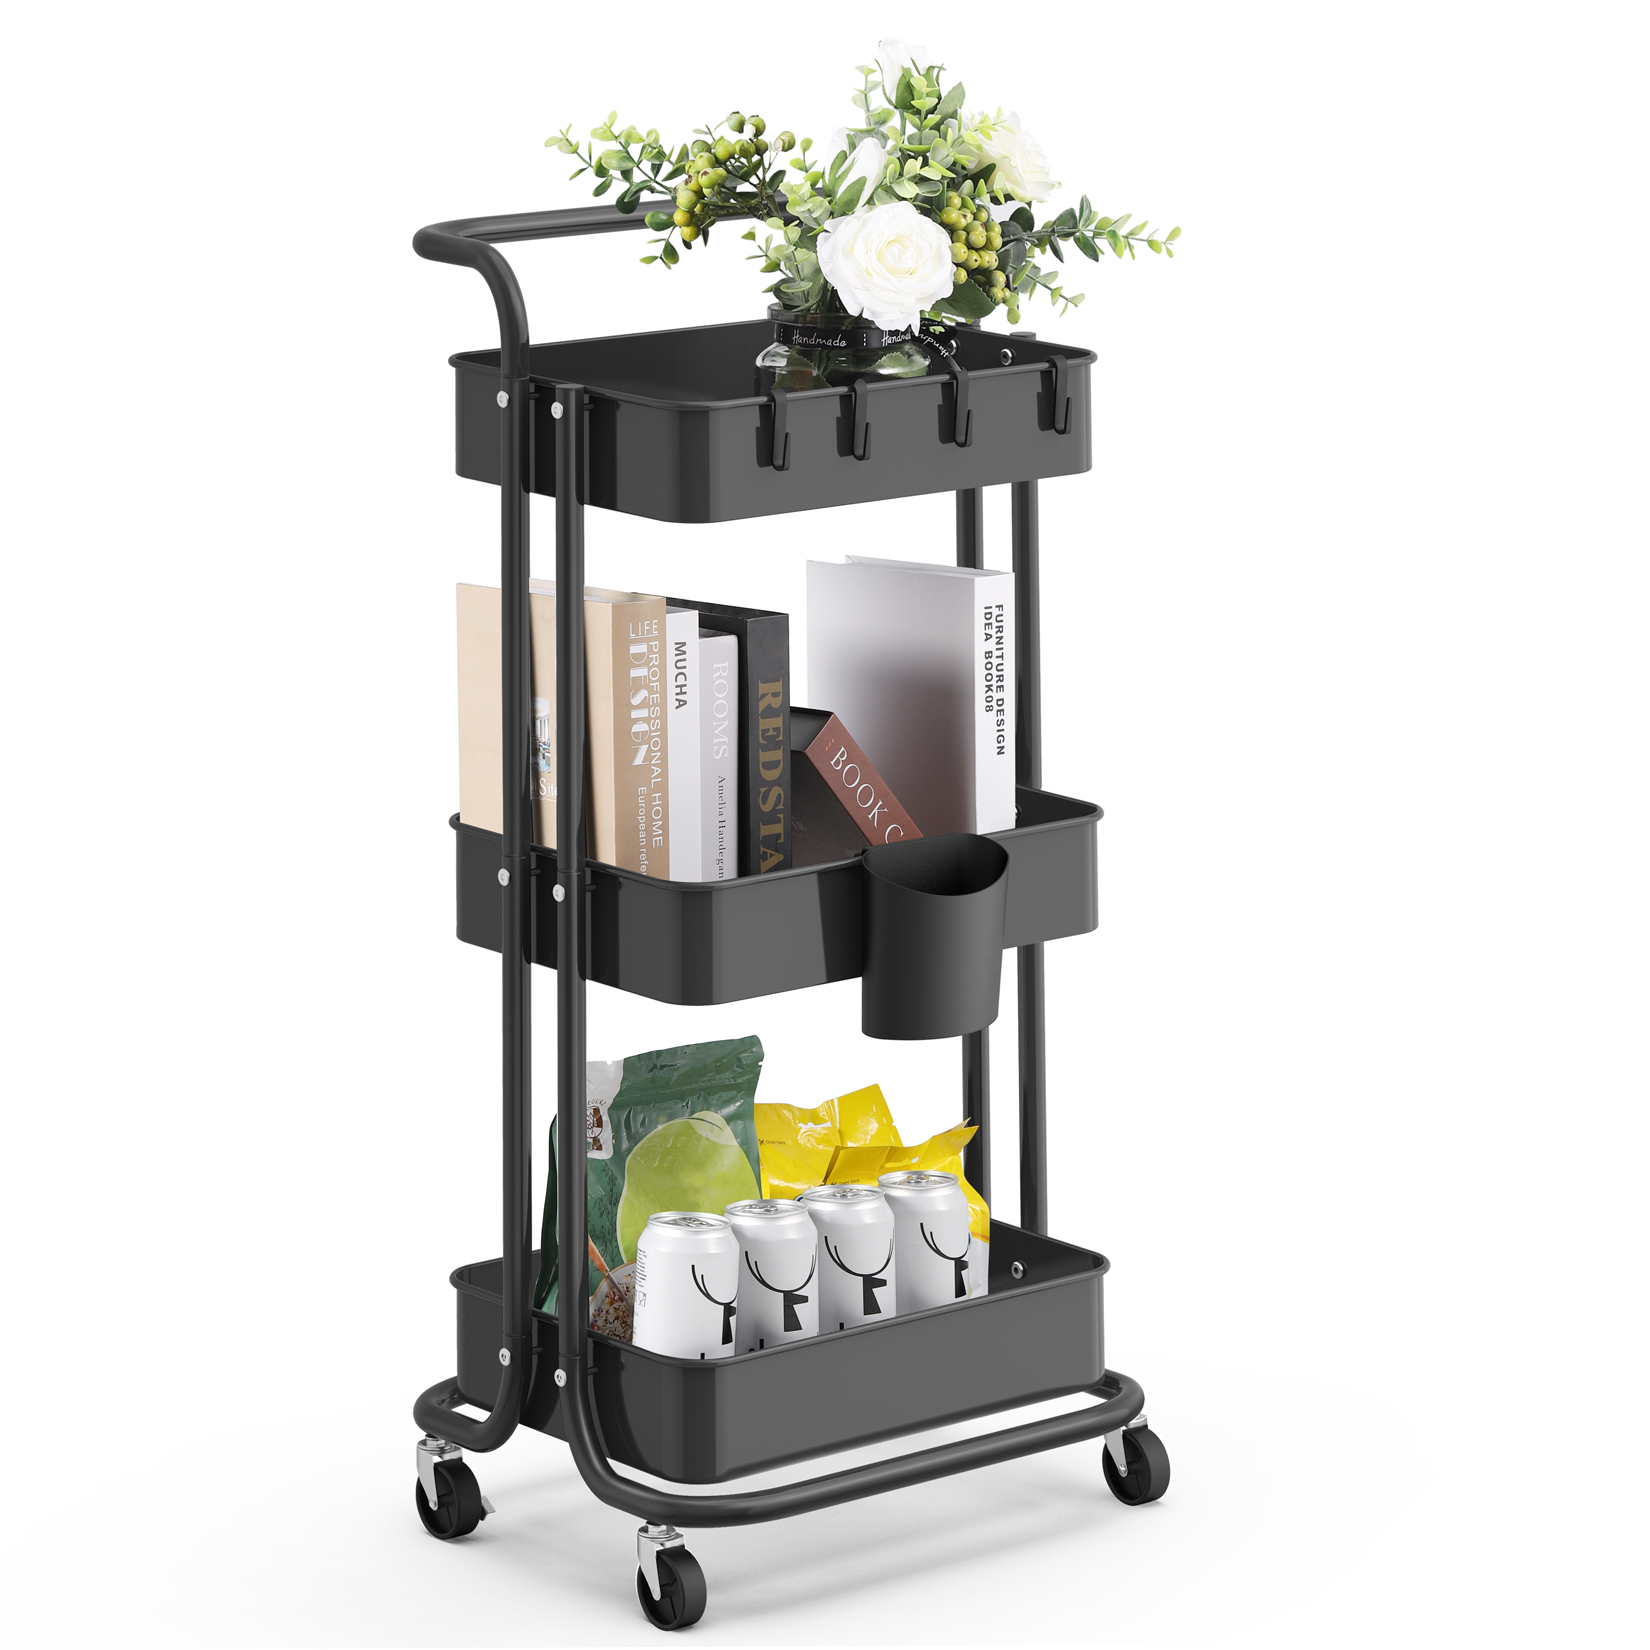 Office alvorog 3-Tier Metal Rolling Utility Cart Kitchen White Salon & Spa Library Heavy Duty Storage Organizer Multifunction Mesh Basket Standing Shelf with Handles and Wheels for Bathroom